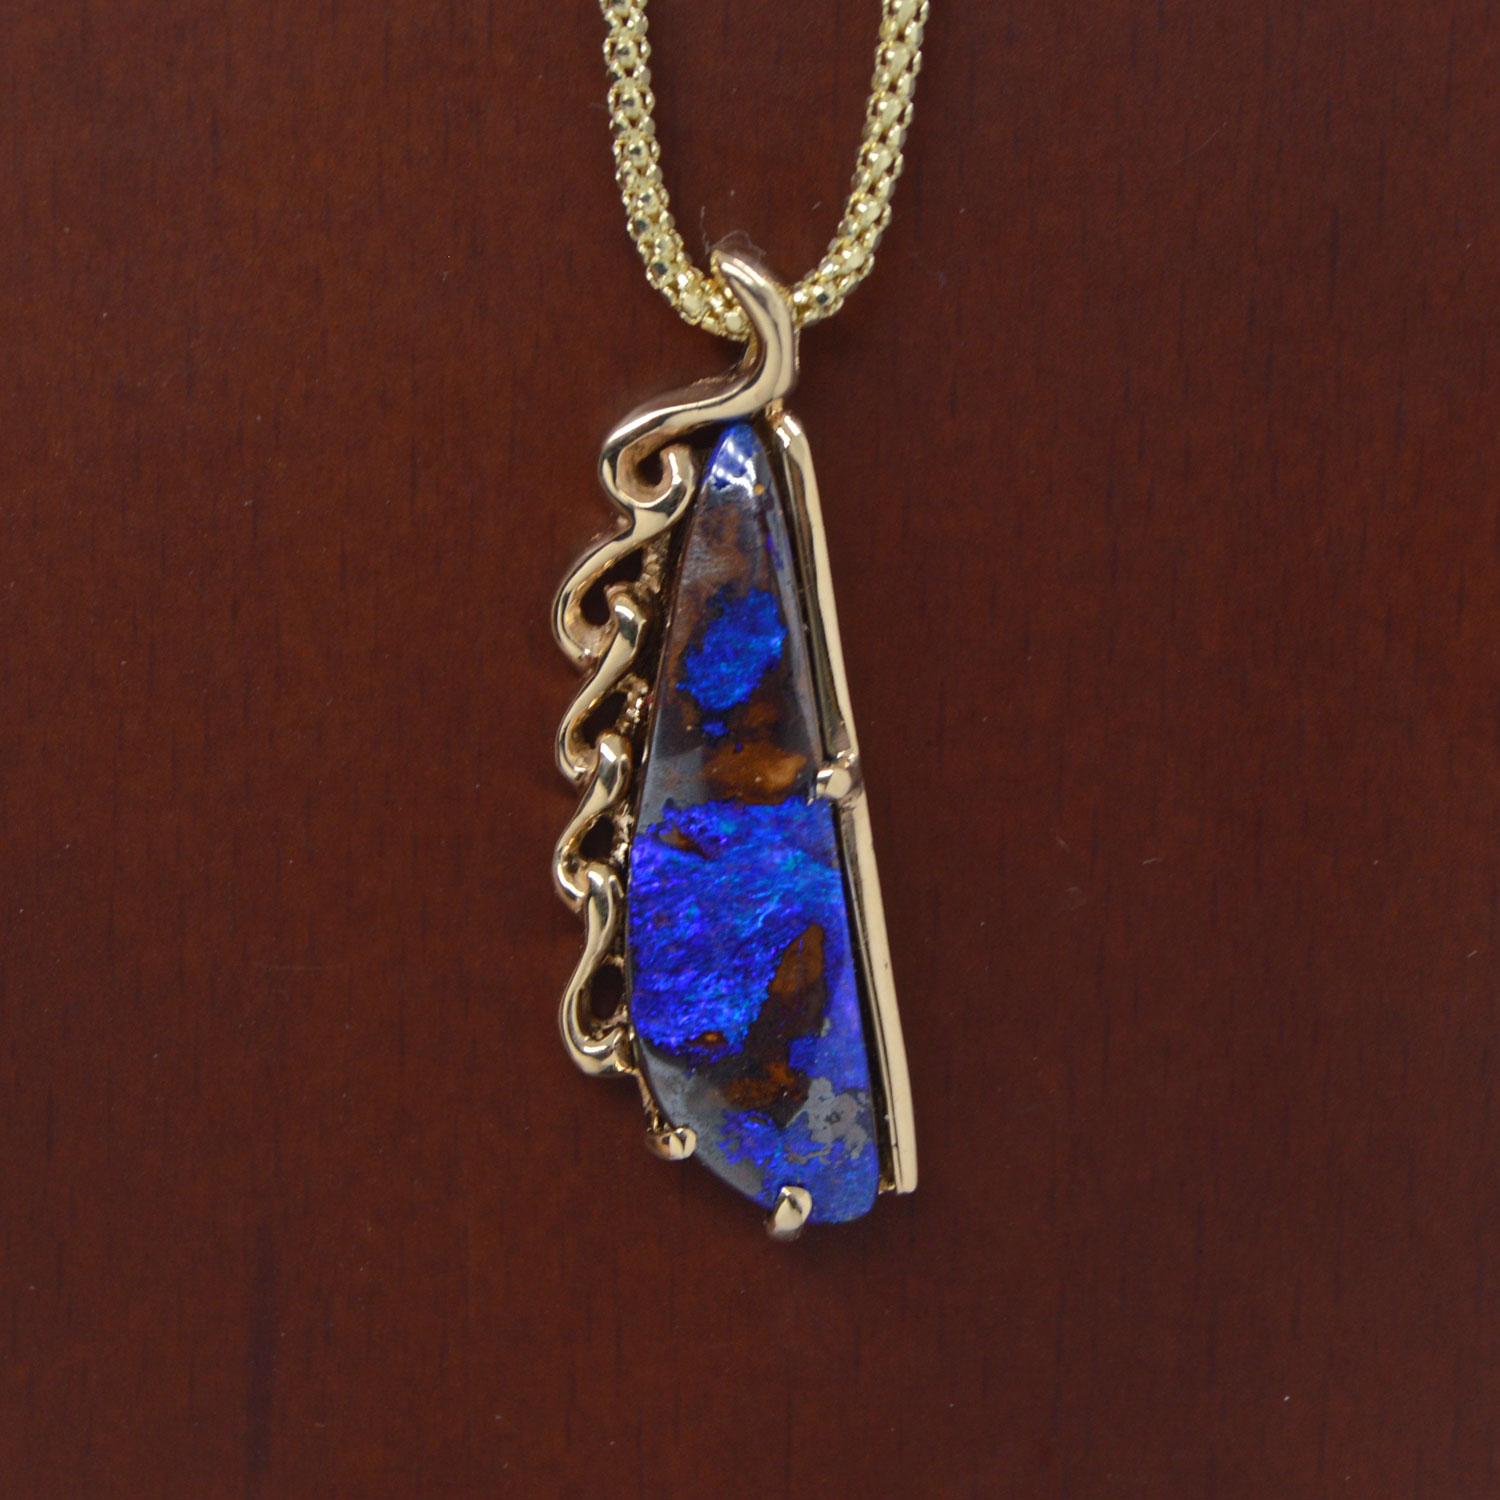 Australian boulder opal pendant custom jewelry with blue and brown gemstone and 14K yellow gold carved pendant made by Morgan's Treasure